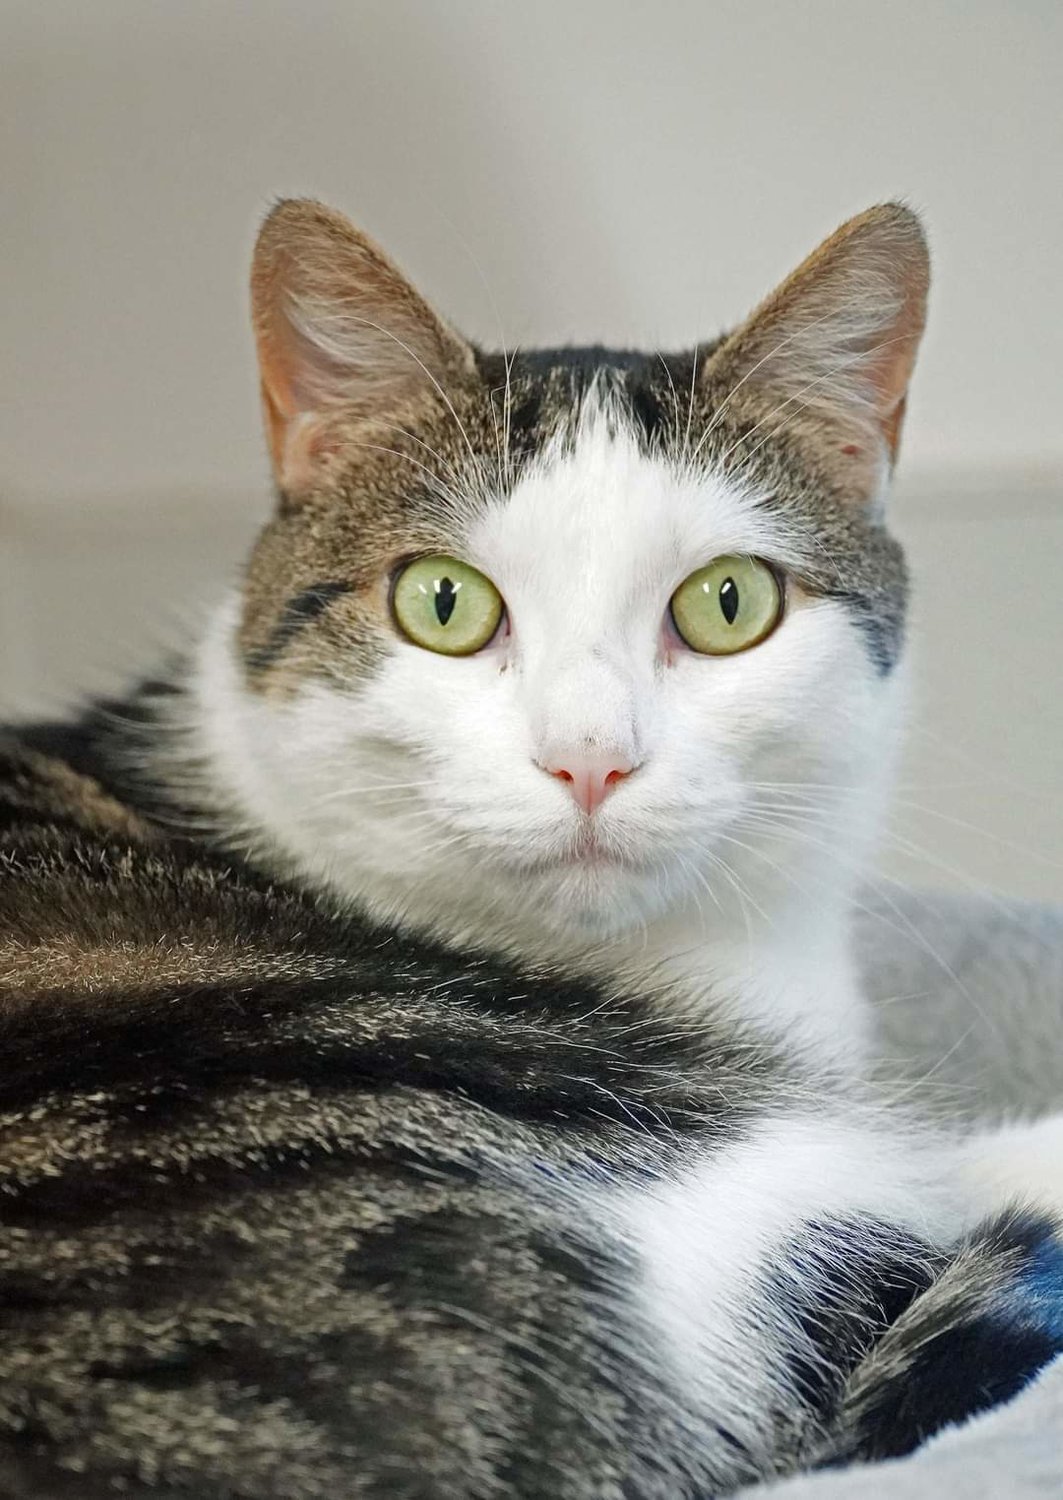 Lucy is 2-year-old shy kitty who lives in the community room with other cats, but would love to find a quiet home and family of her own.  If you would like to meet her, stop by Wanderers’ Rest Humane Association, 7138 Sutherland Drive, Canastota, or give them a call at 315-697-2796.